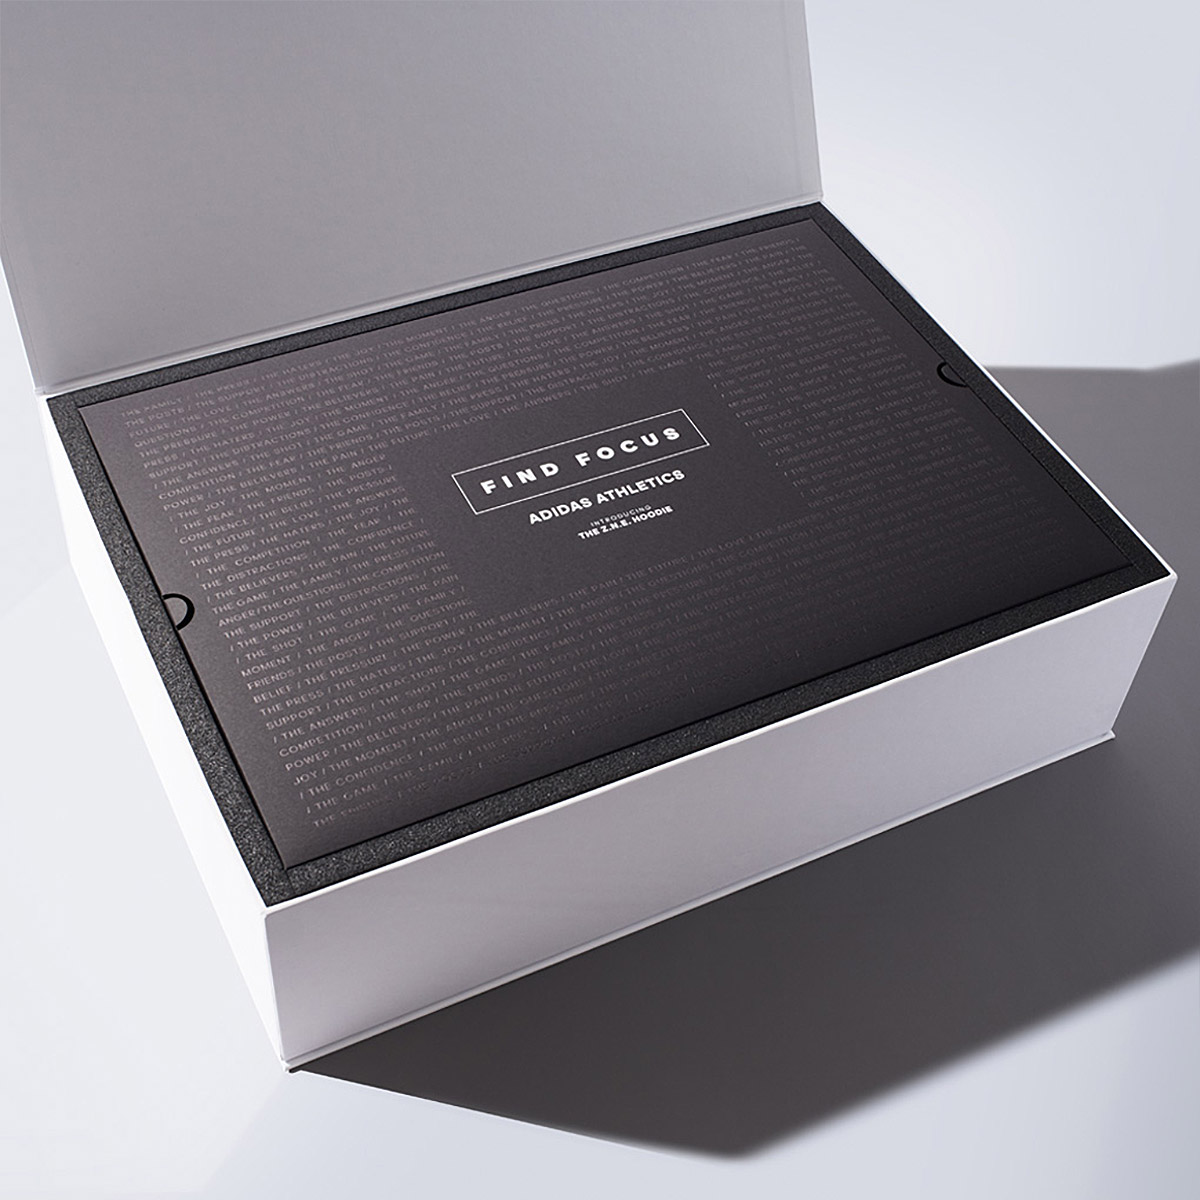 Find Focus: Premium Adidas Packaging by Colt | Daily design inspiration for | Inspiration Grid